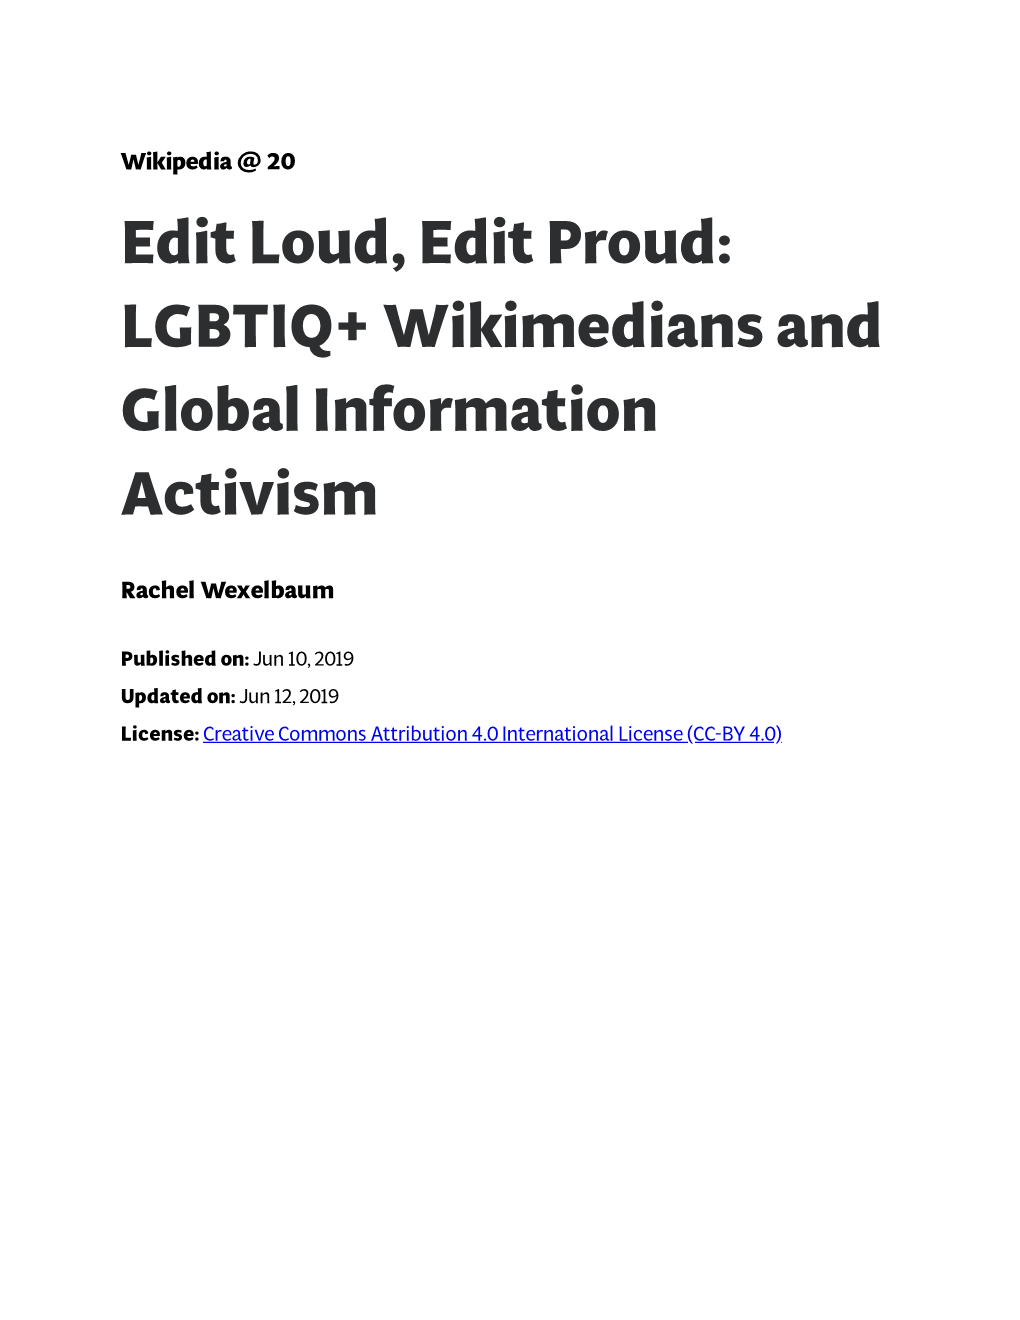 LGBTIQ+ Wikimedians and Global Information Activism